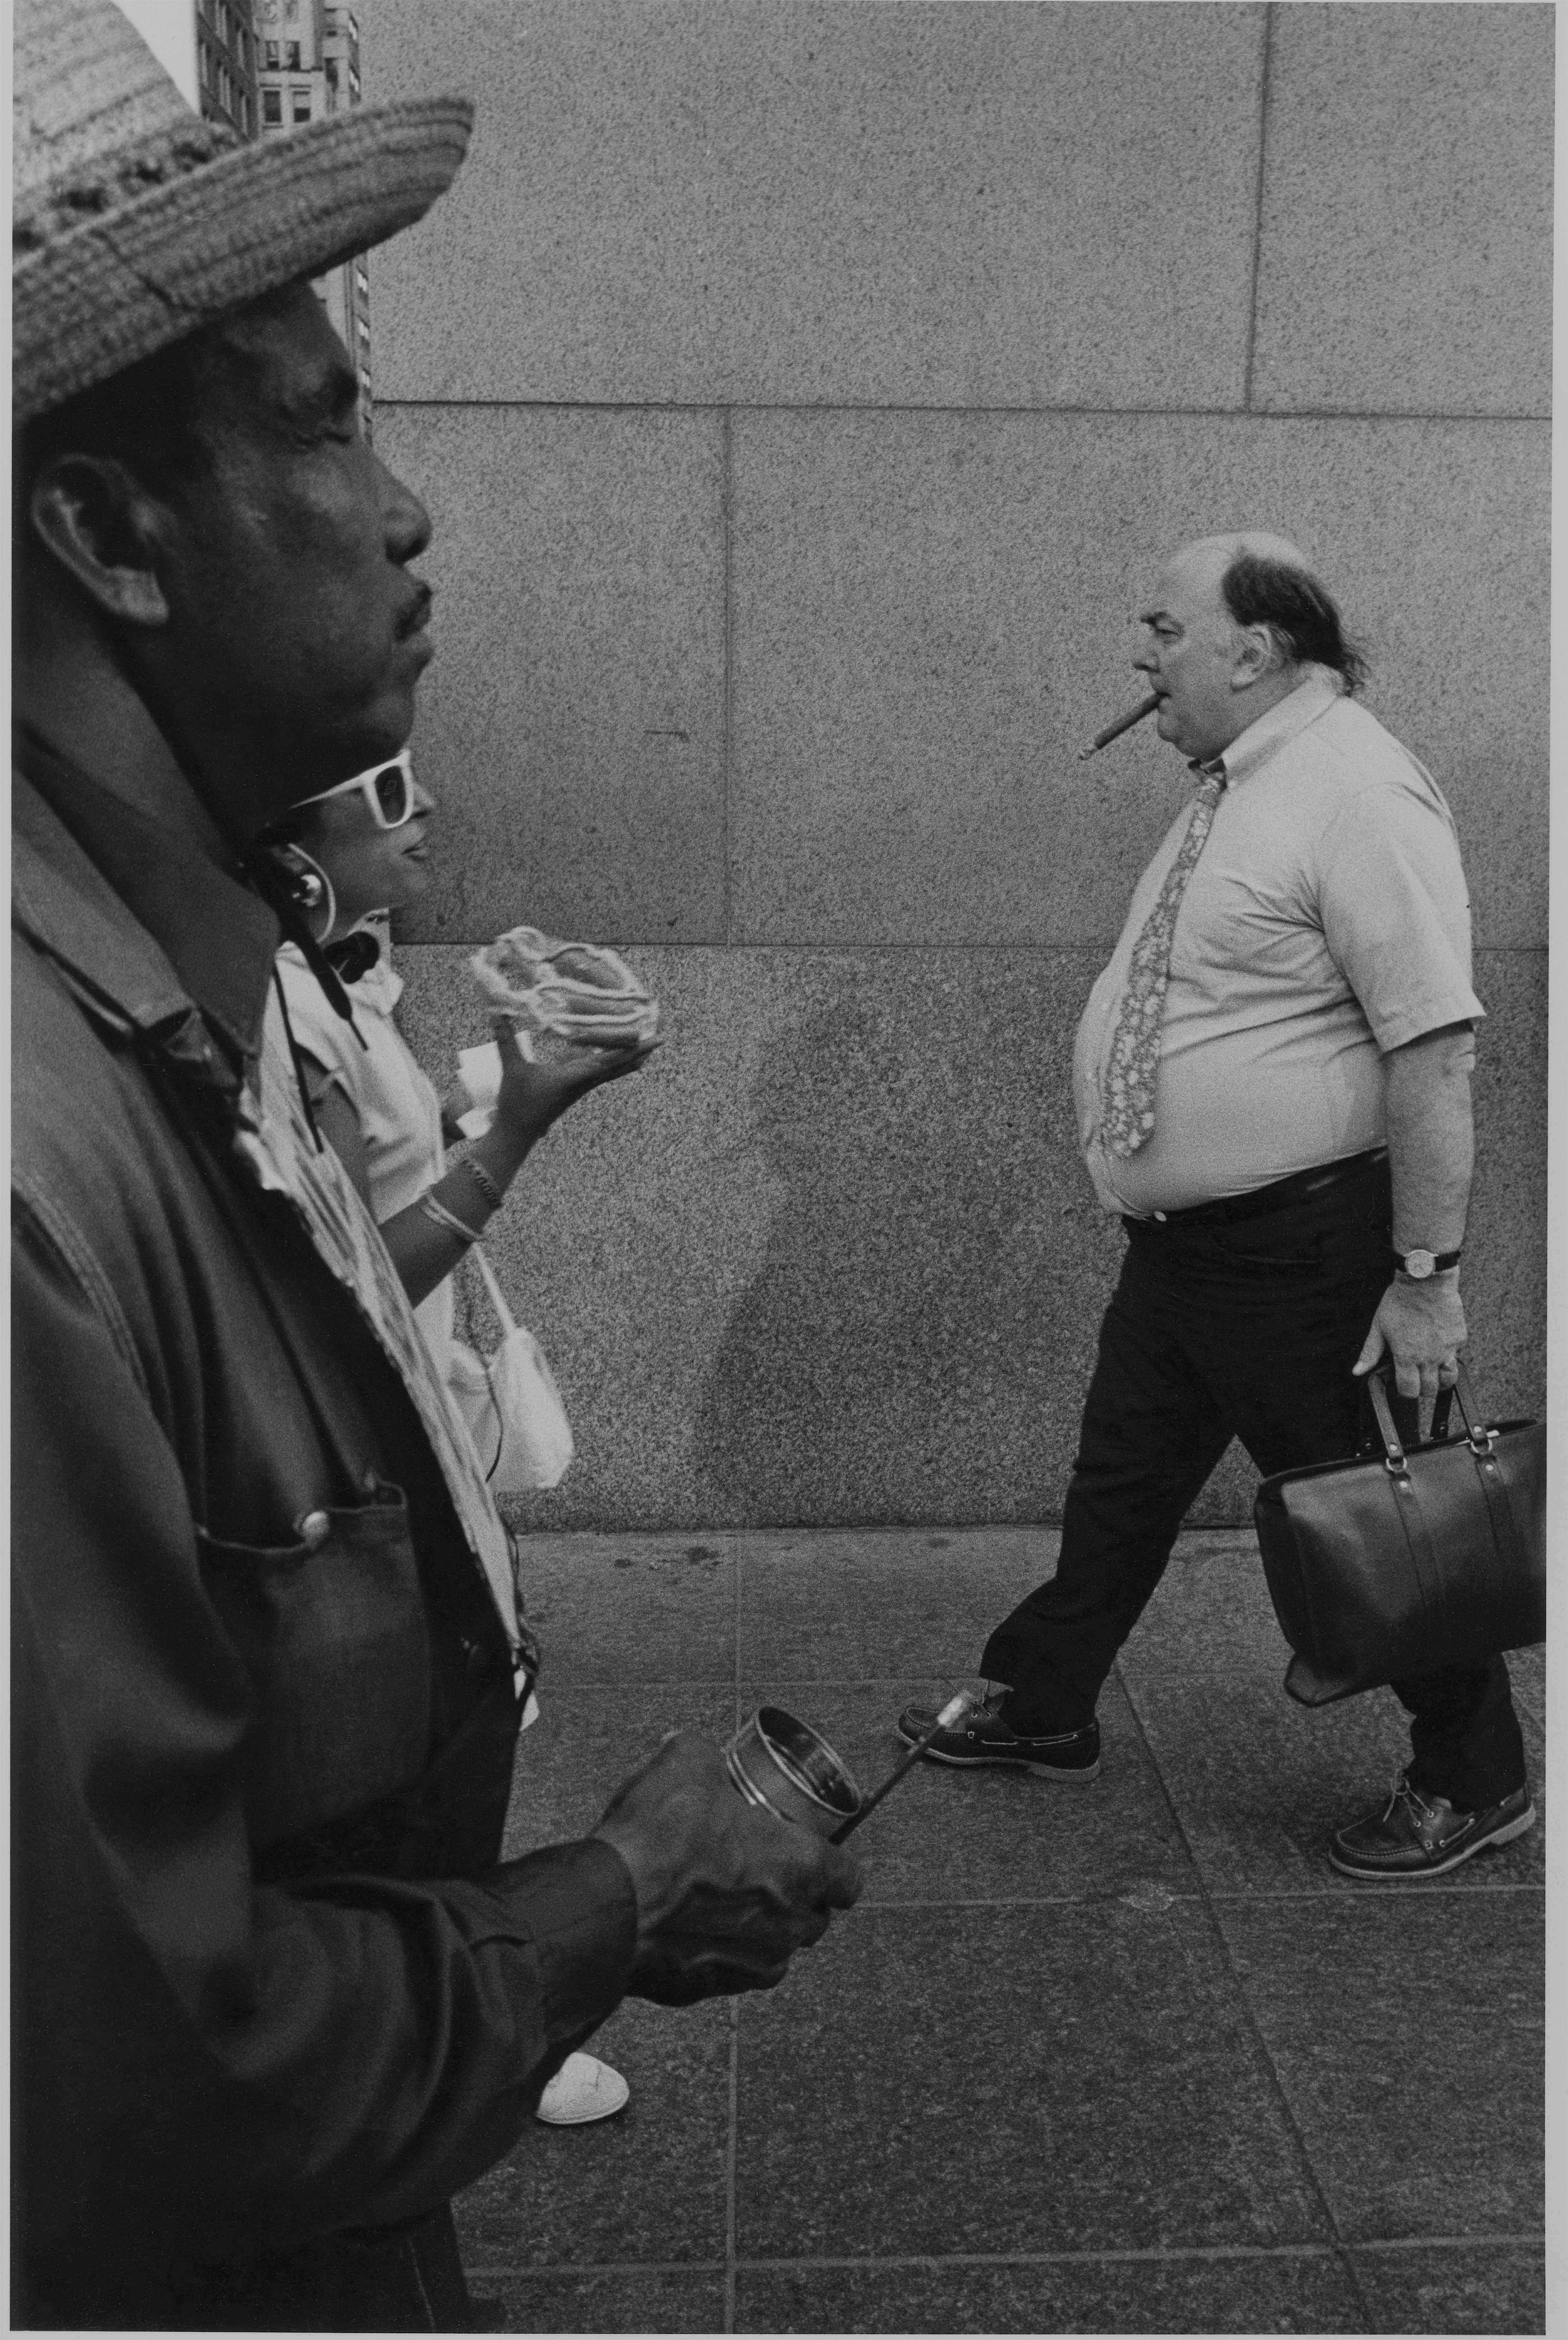 human soup, 5th &amp; 57th, nyc, mid 1980’s